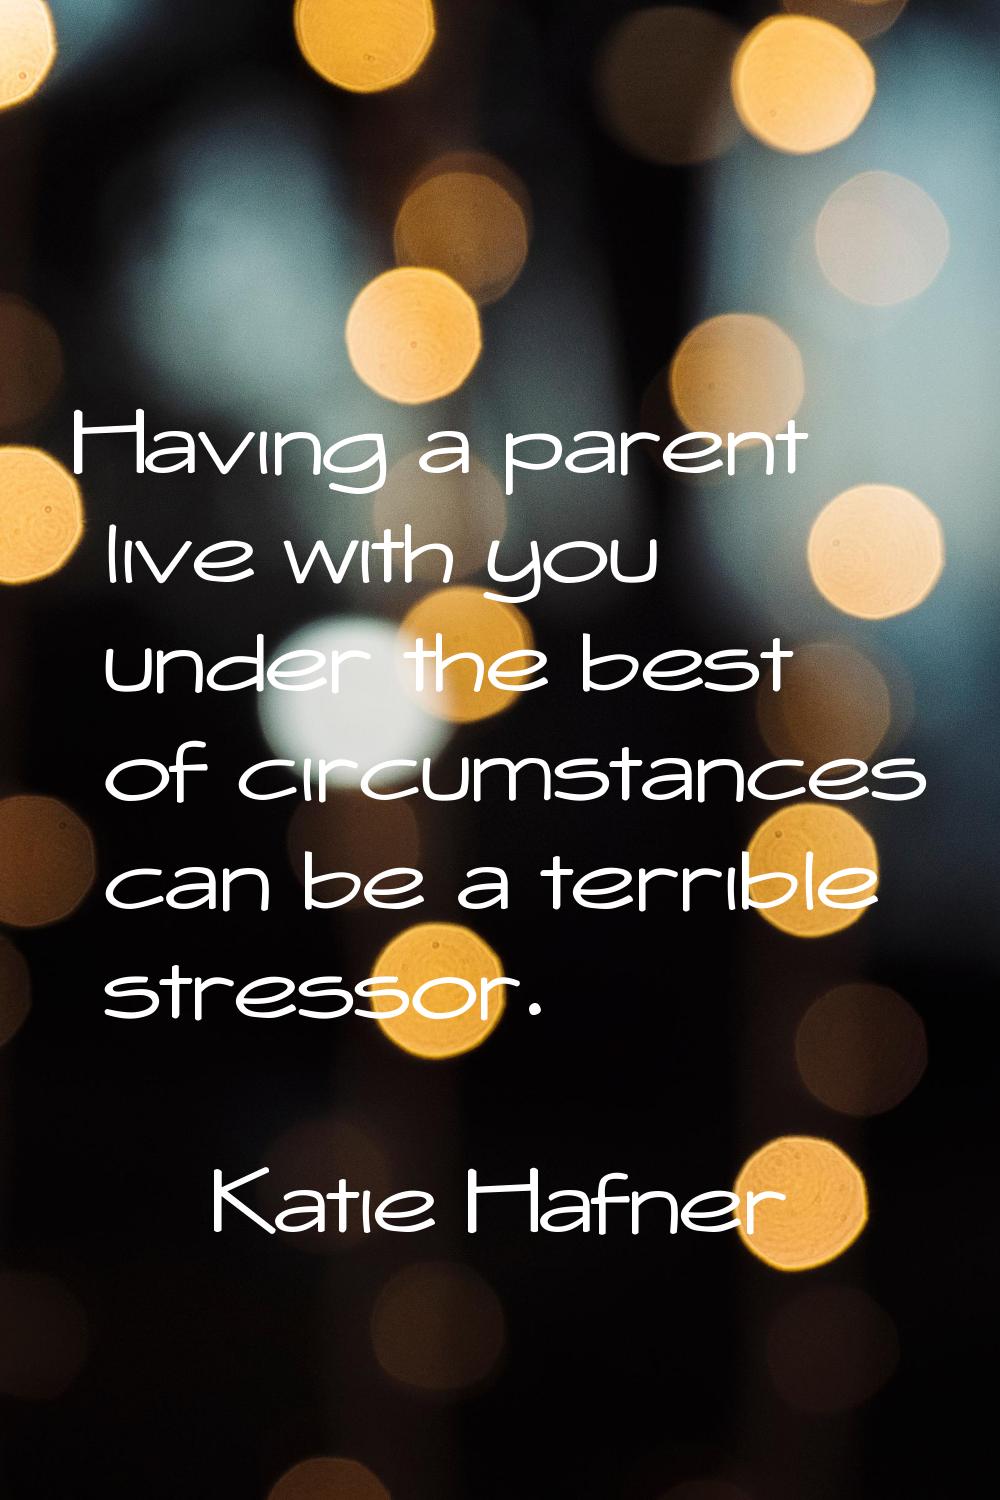 Having a parent live with you under the best of circumstances can be a terrible stressor.